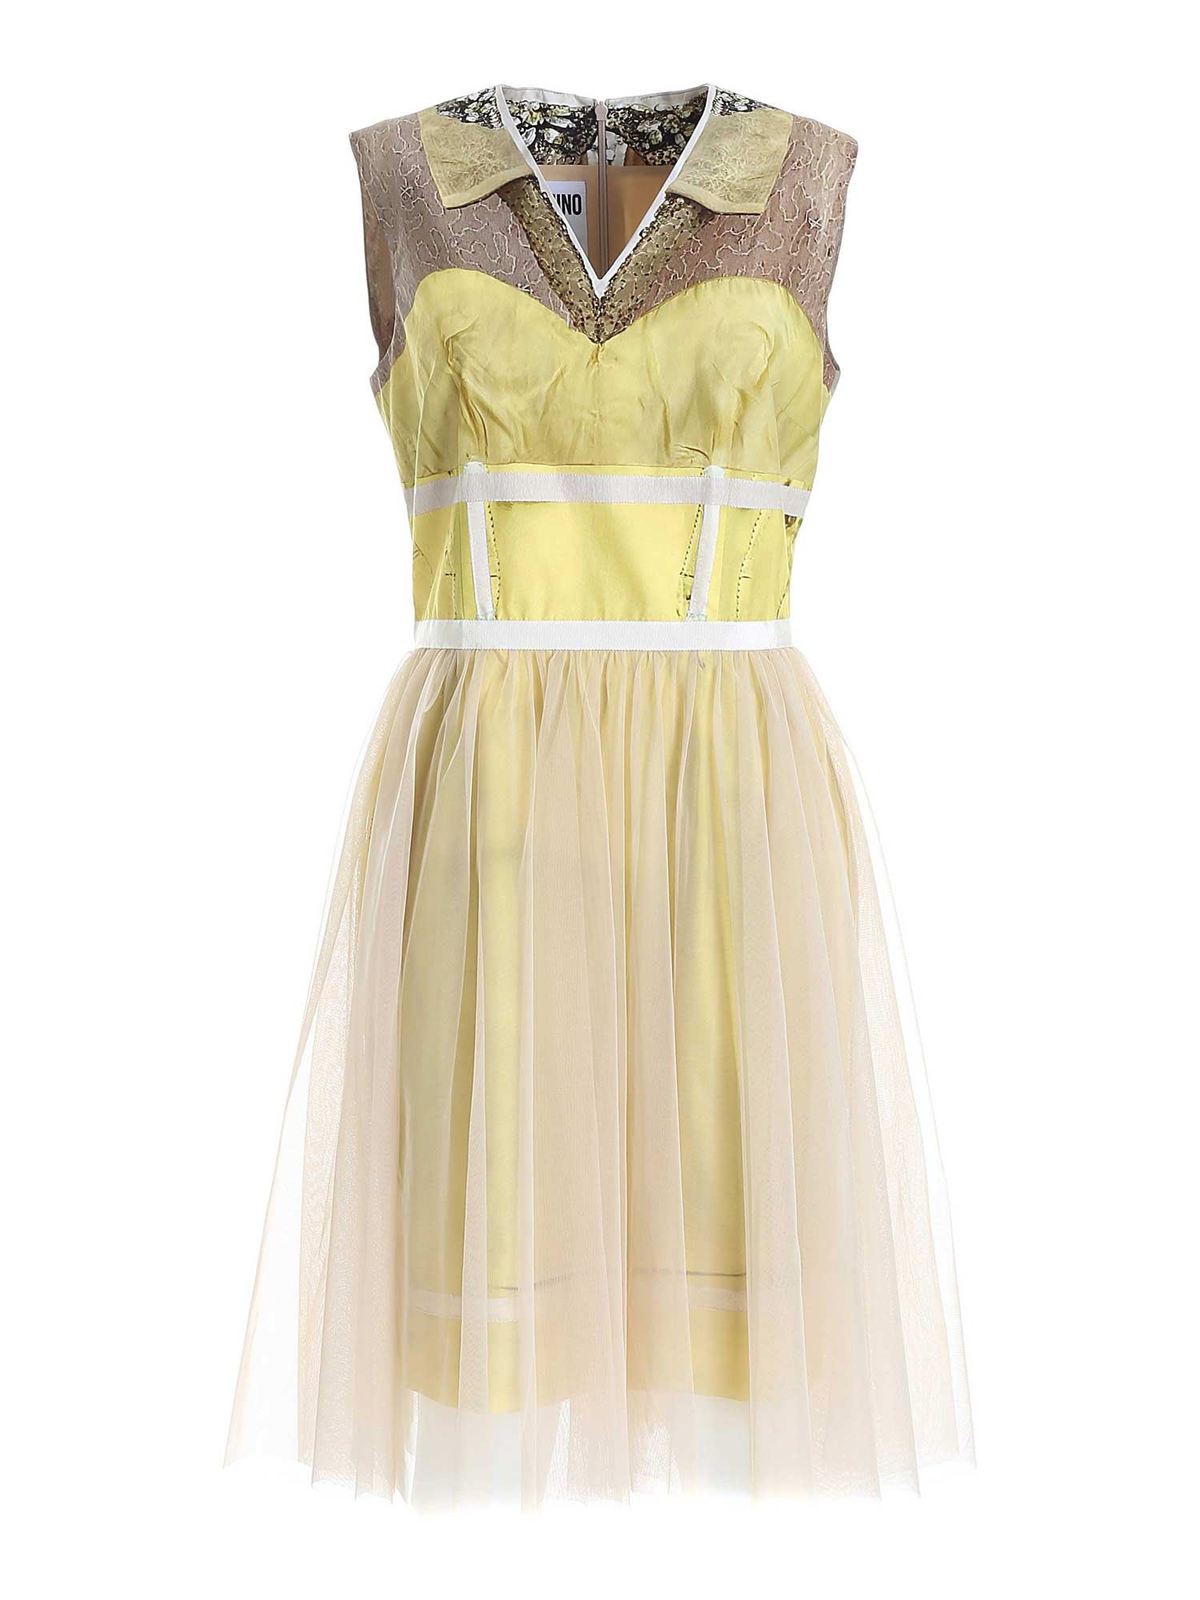 MOSCHINO INSIDE OUT TROMPE-LŒIL DRESS IN YELLOW